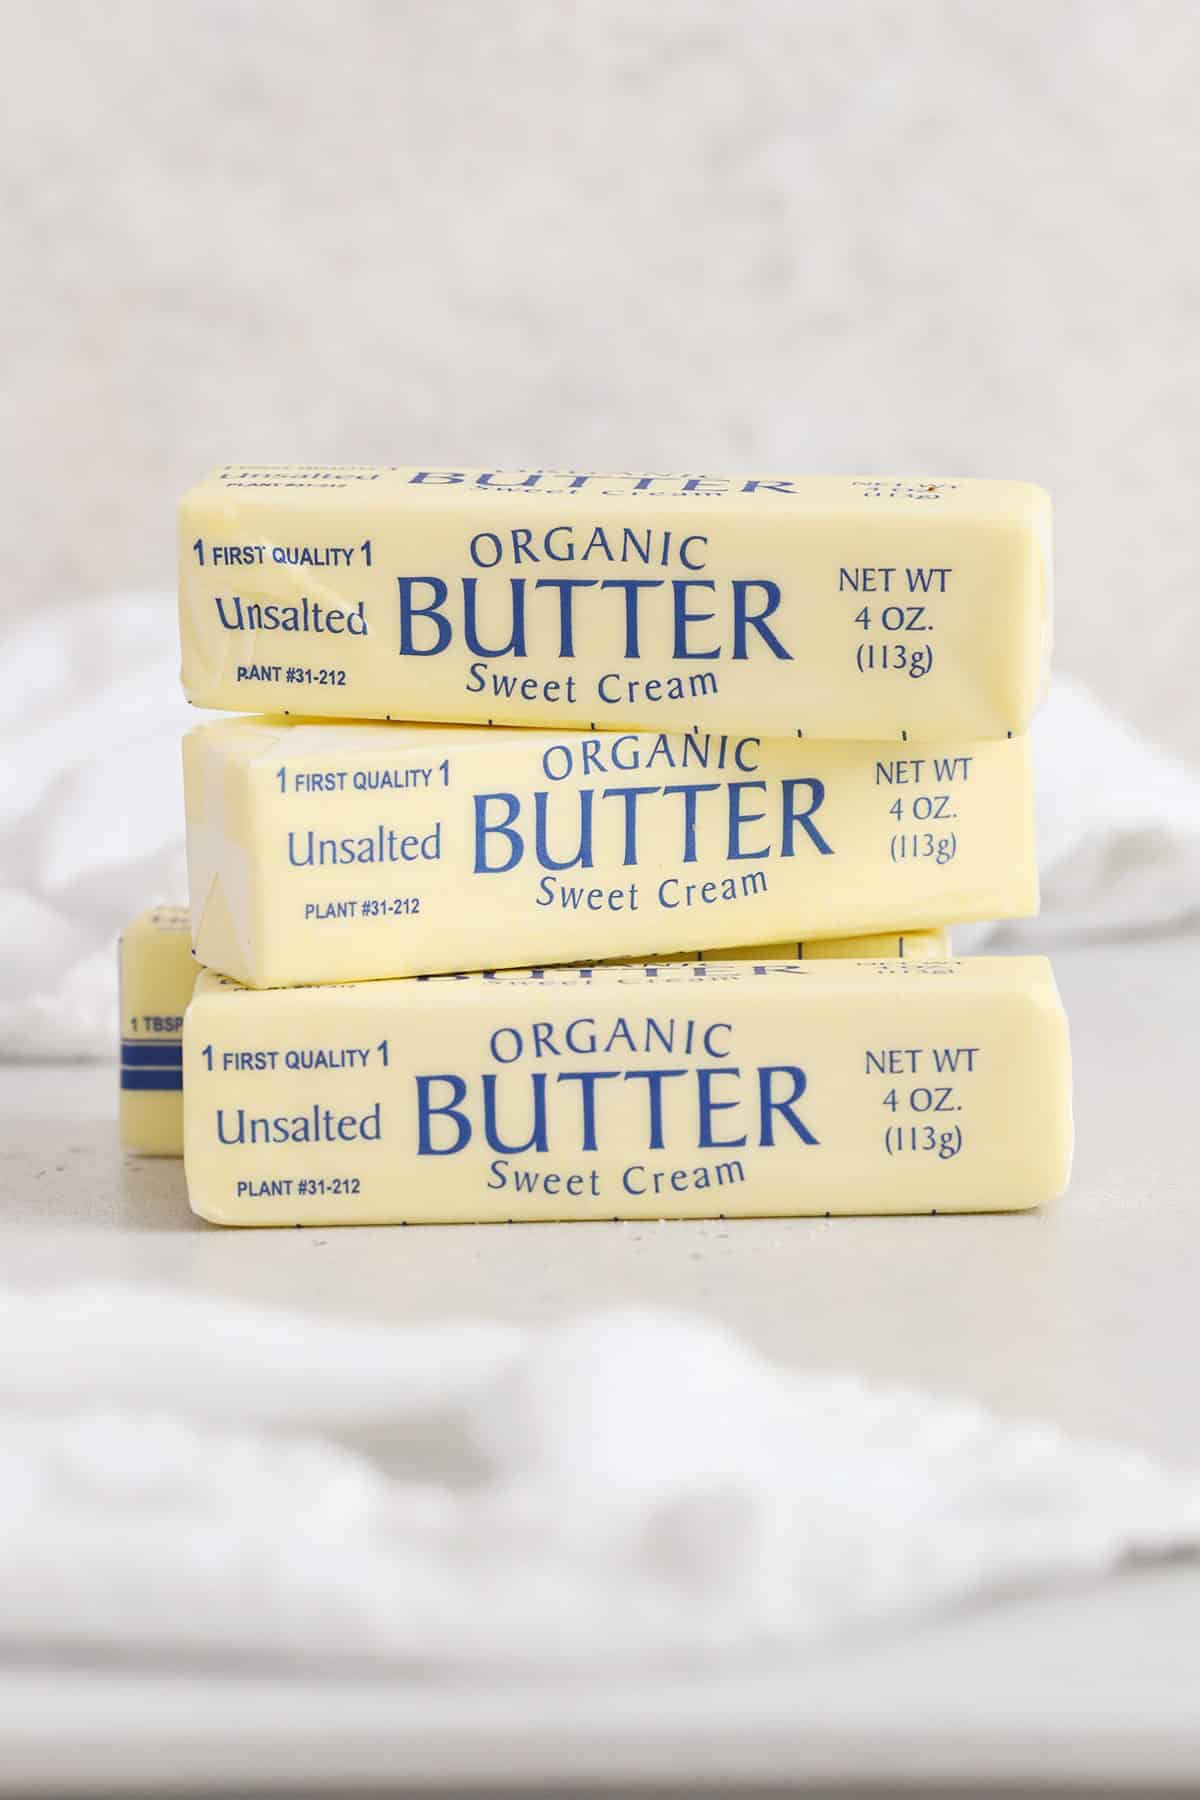 Four sticks of butter stacked on a white background